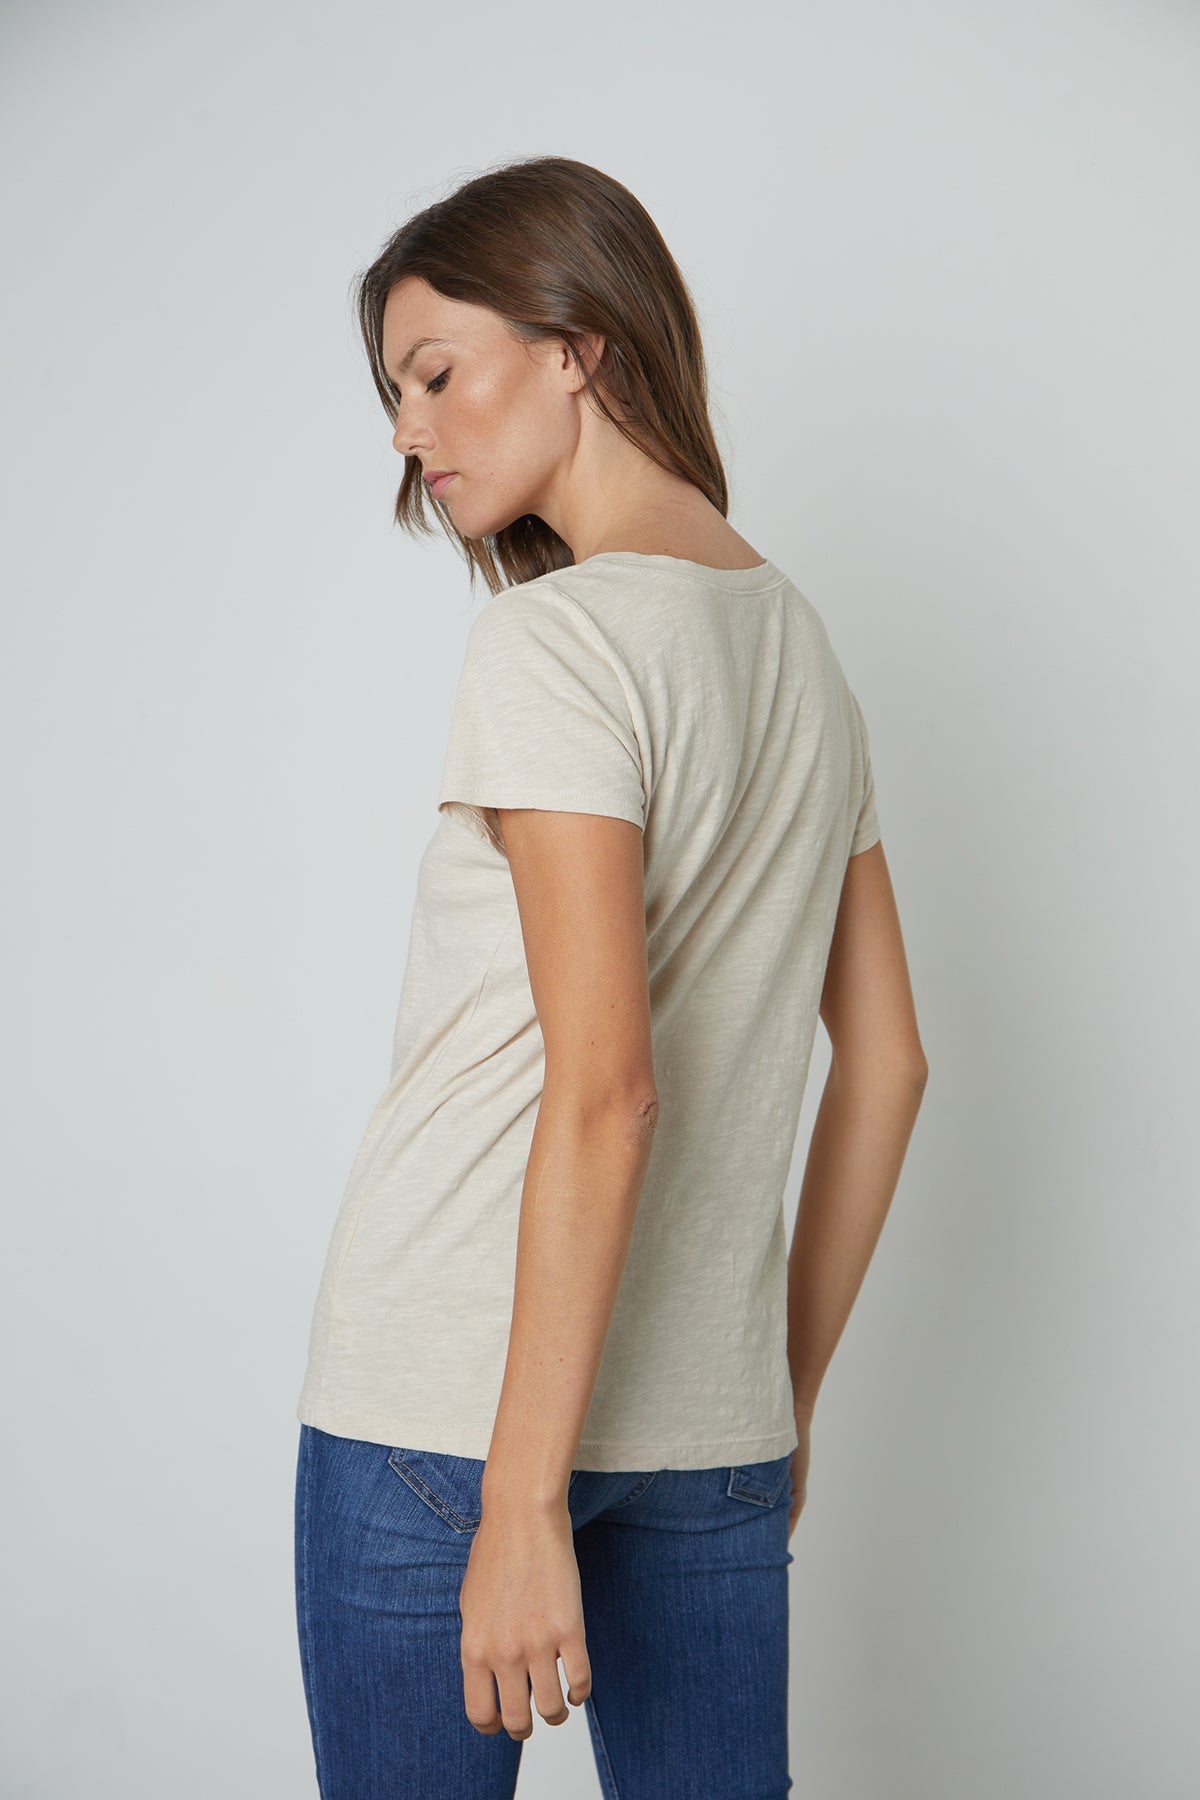   Lilith Tee in Bisque Back View 